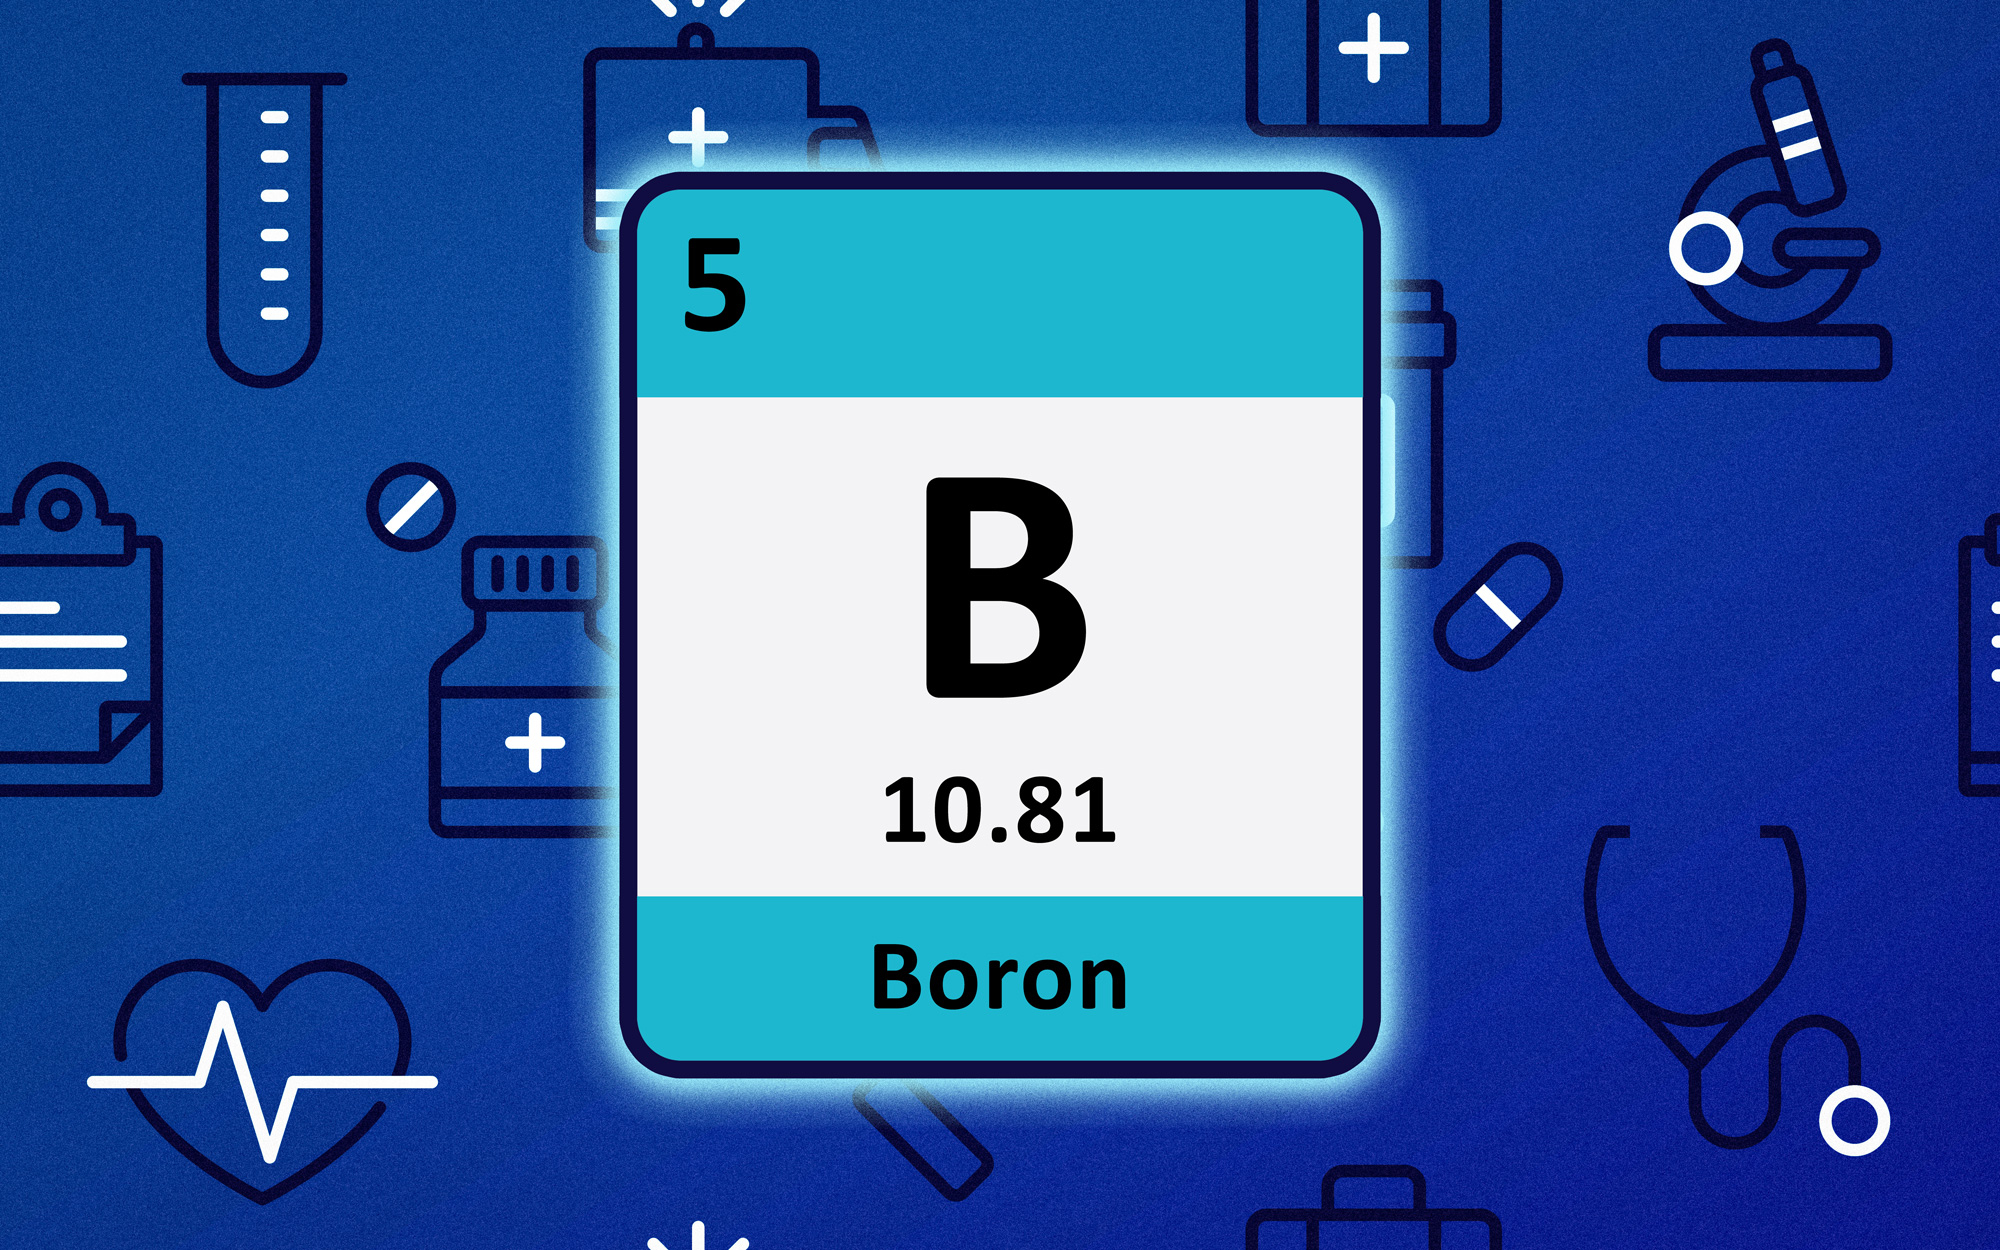 An image of Boron on the Periodic Table.